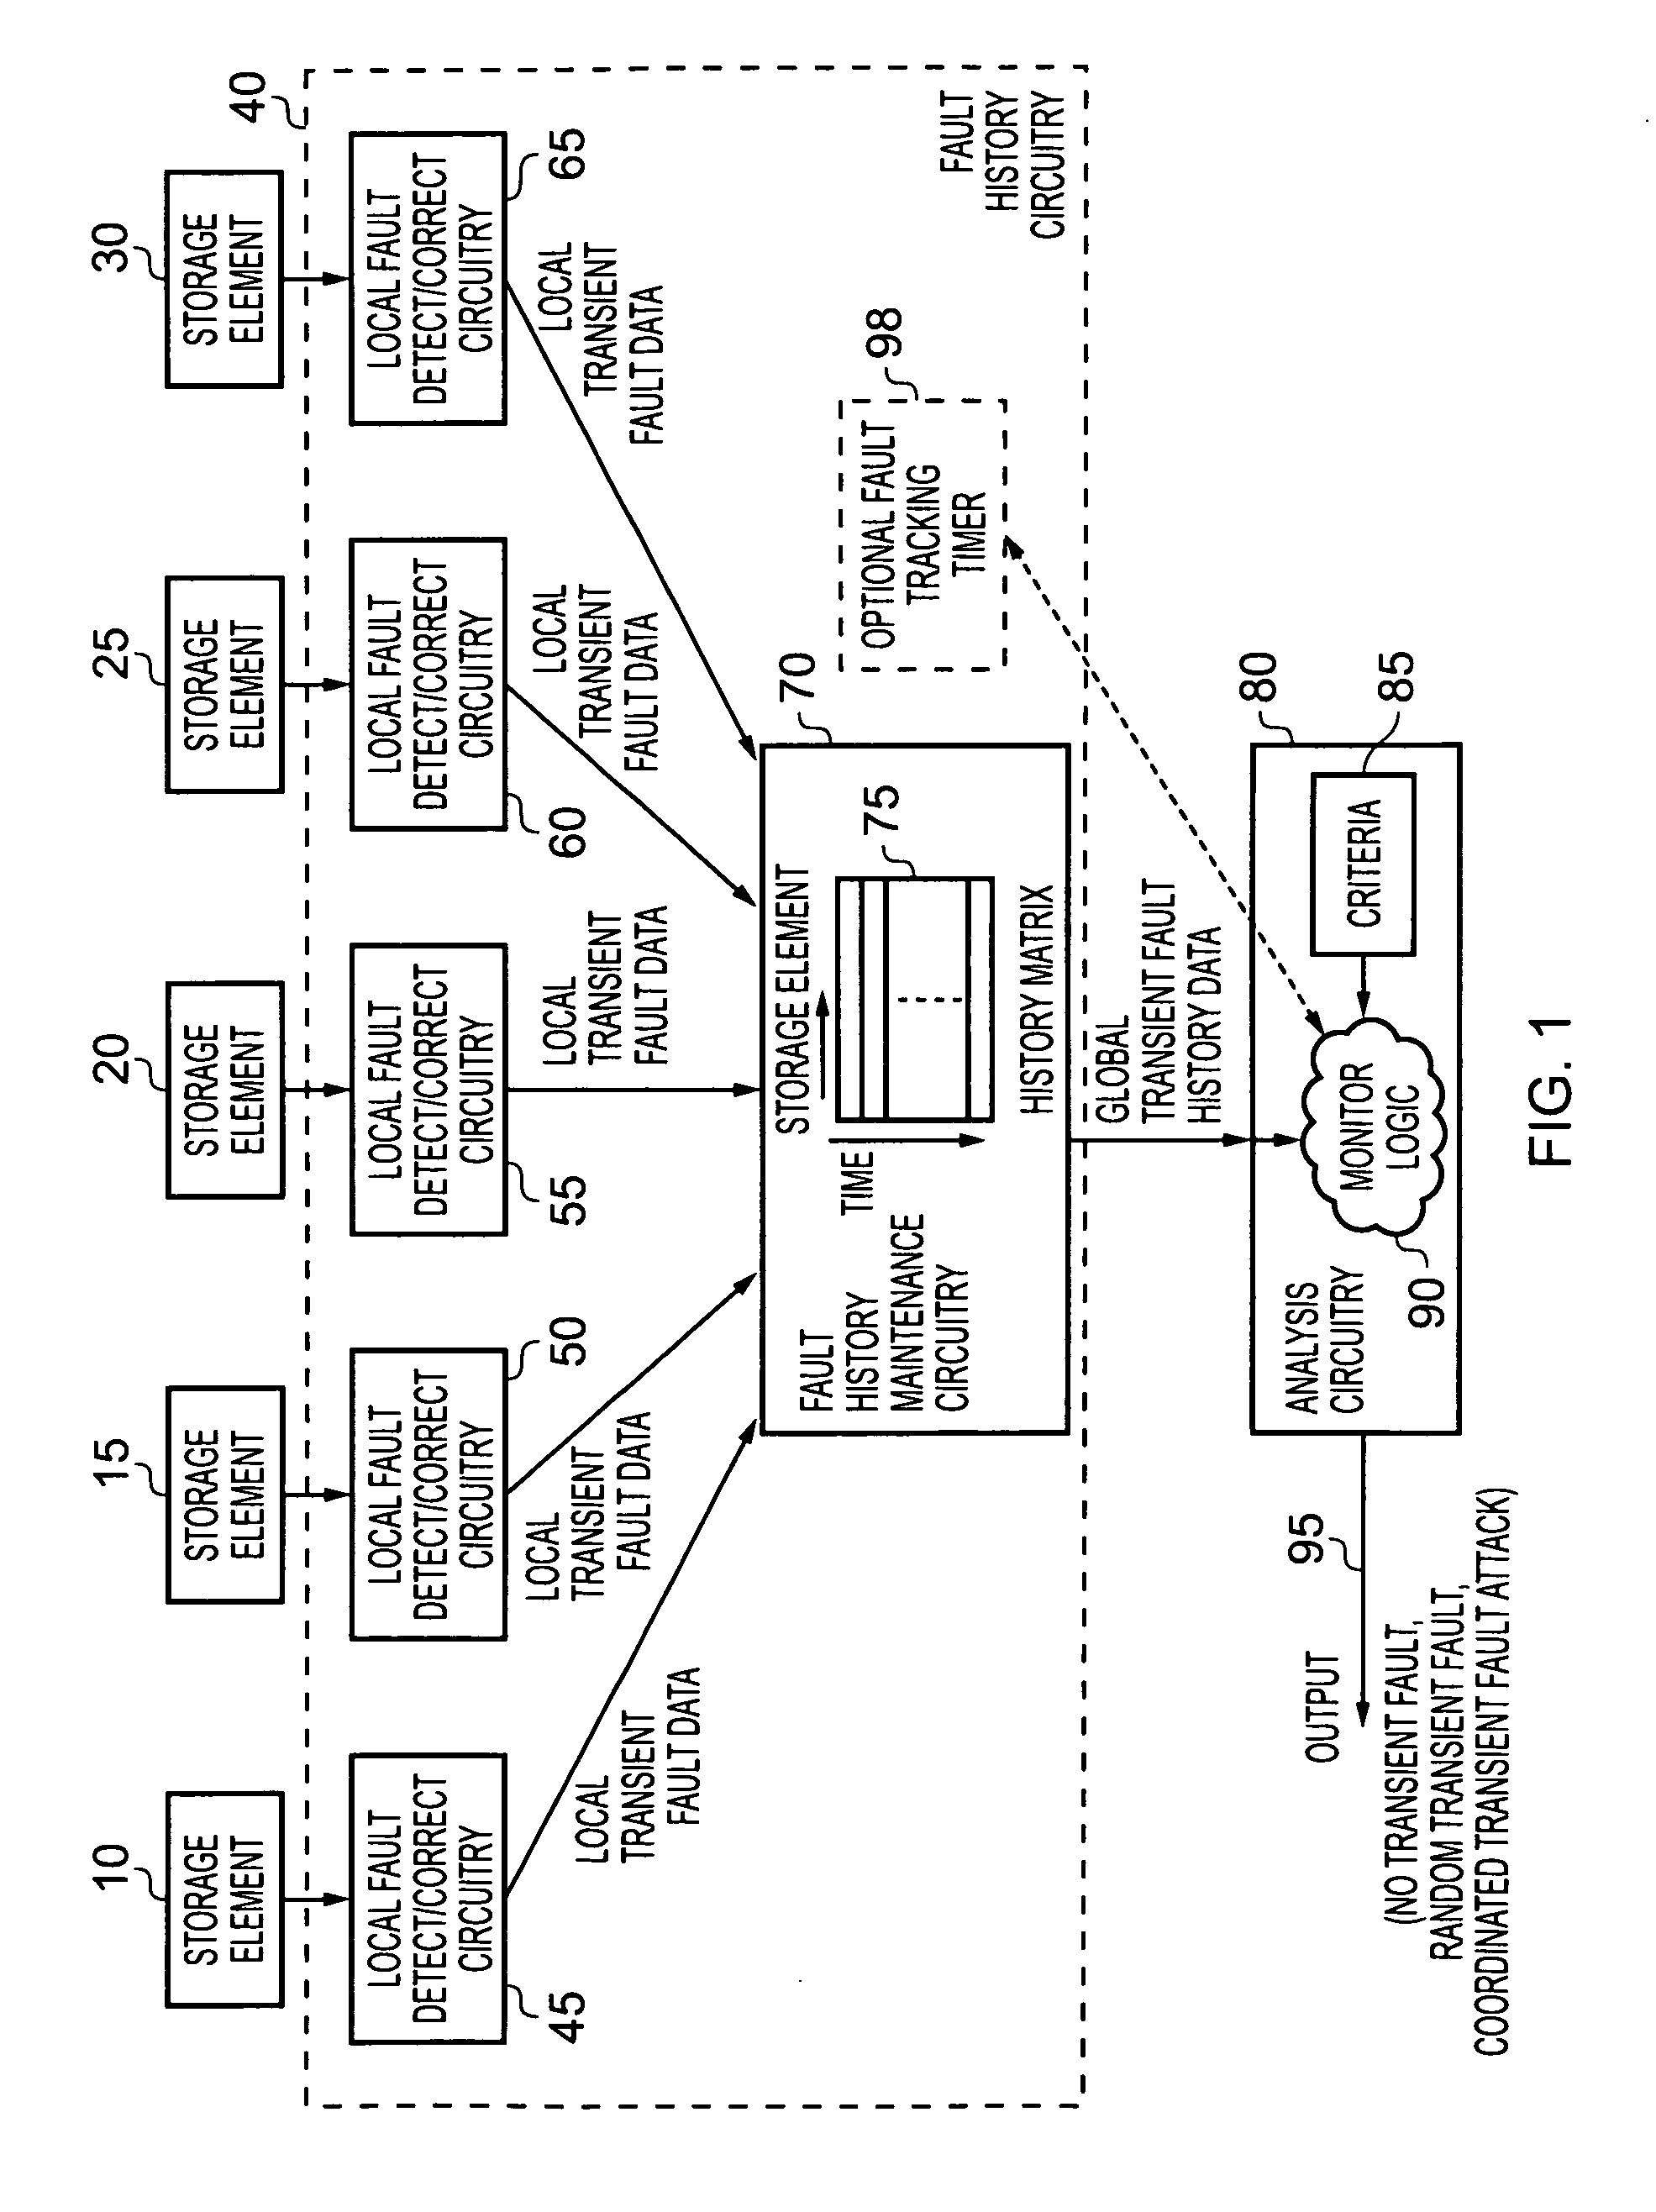 Data processing apparatus and method for analysing transient faults occurring within storage elements of the data processing apparatus